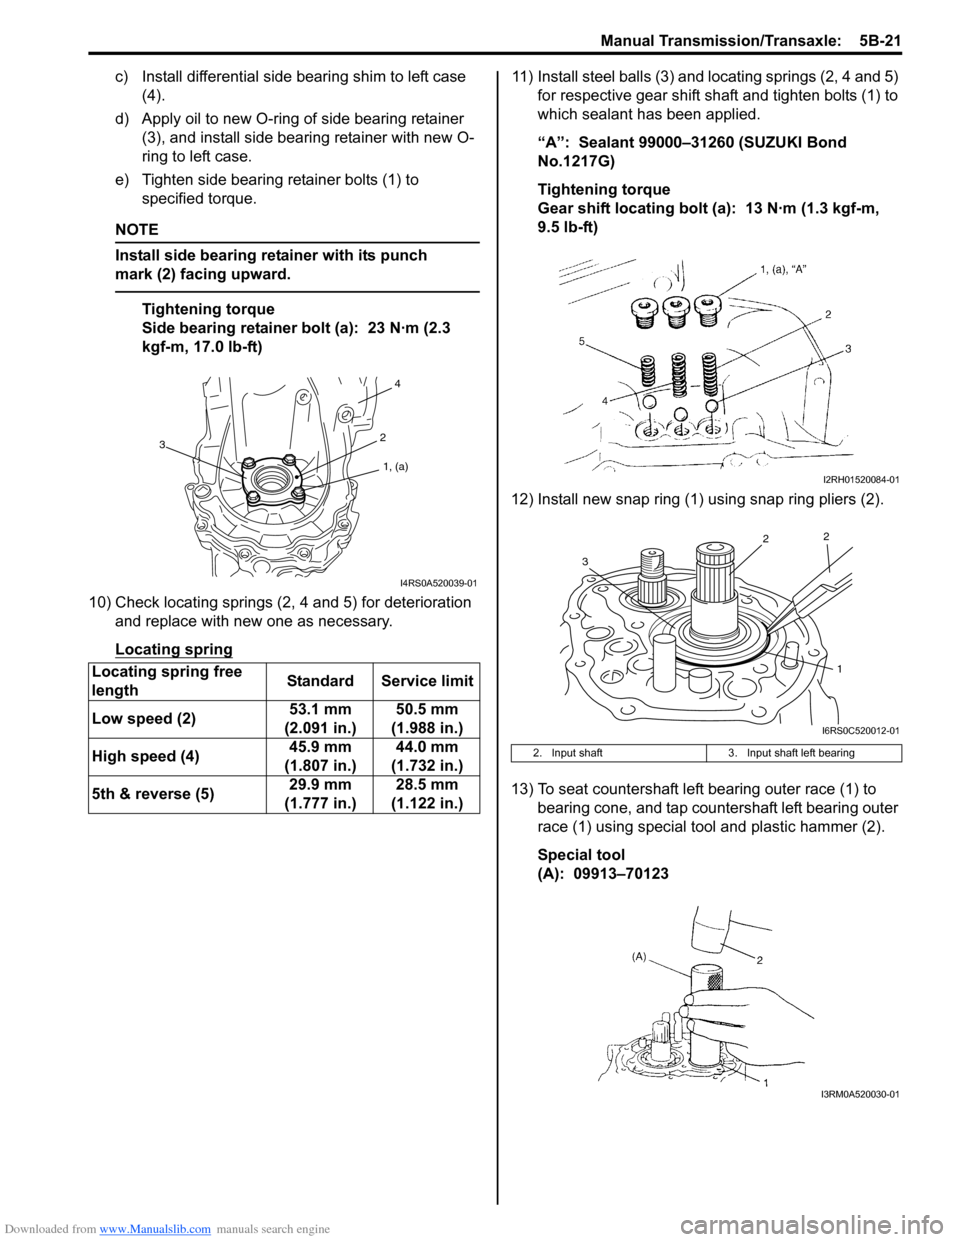 SUZUKI SWIFT 2007 2.G Service Owners Guide Downloaded from www.Manualslib.com manuals search engine Manual Transmission/Transaxle:  5B-21
c) Install differential side bearing shim to left case (4).
d) Apply oil to new O-ring of side bearing re